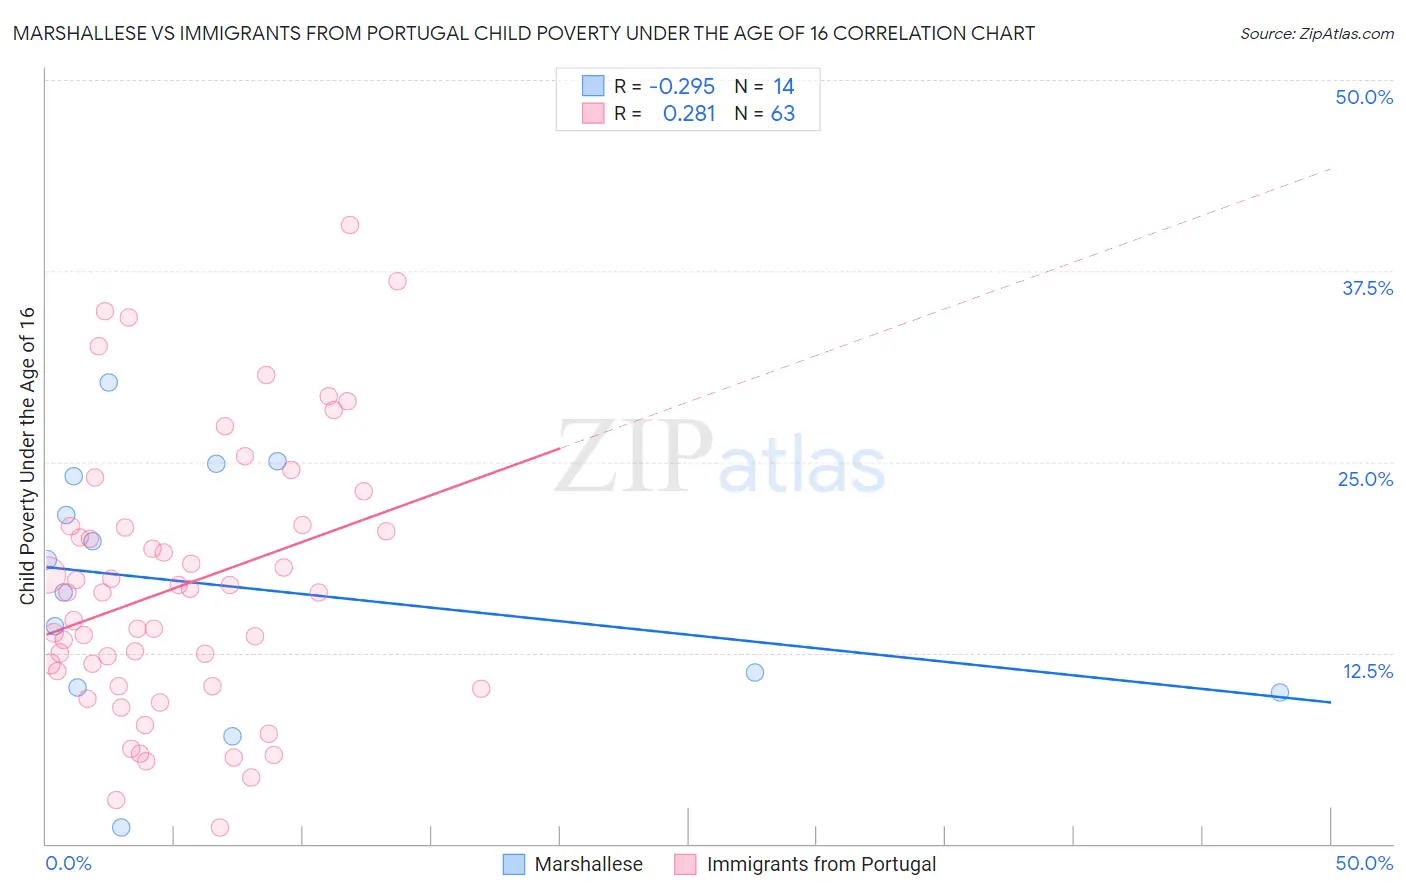 Marshallese vs Immigrants from Portugal Child Poverty Under the Age of 16